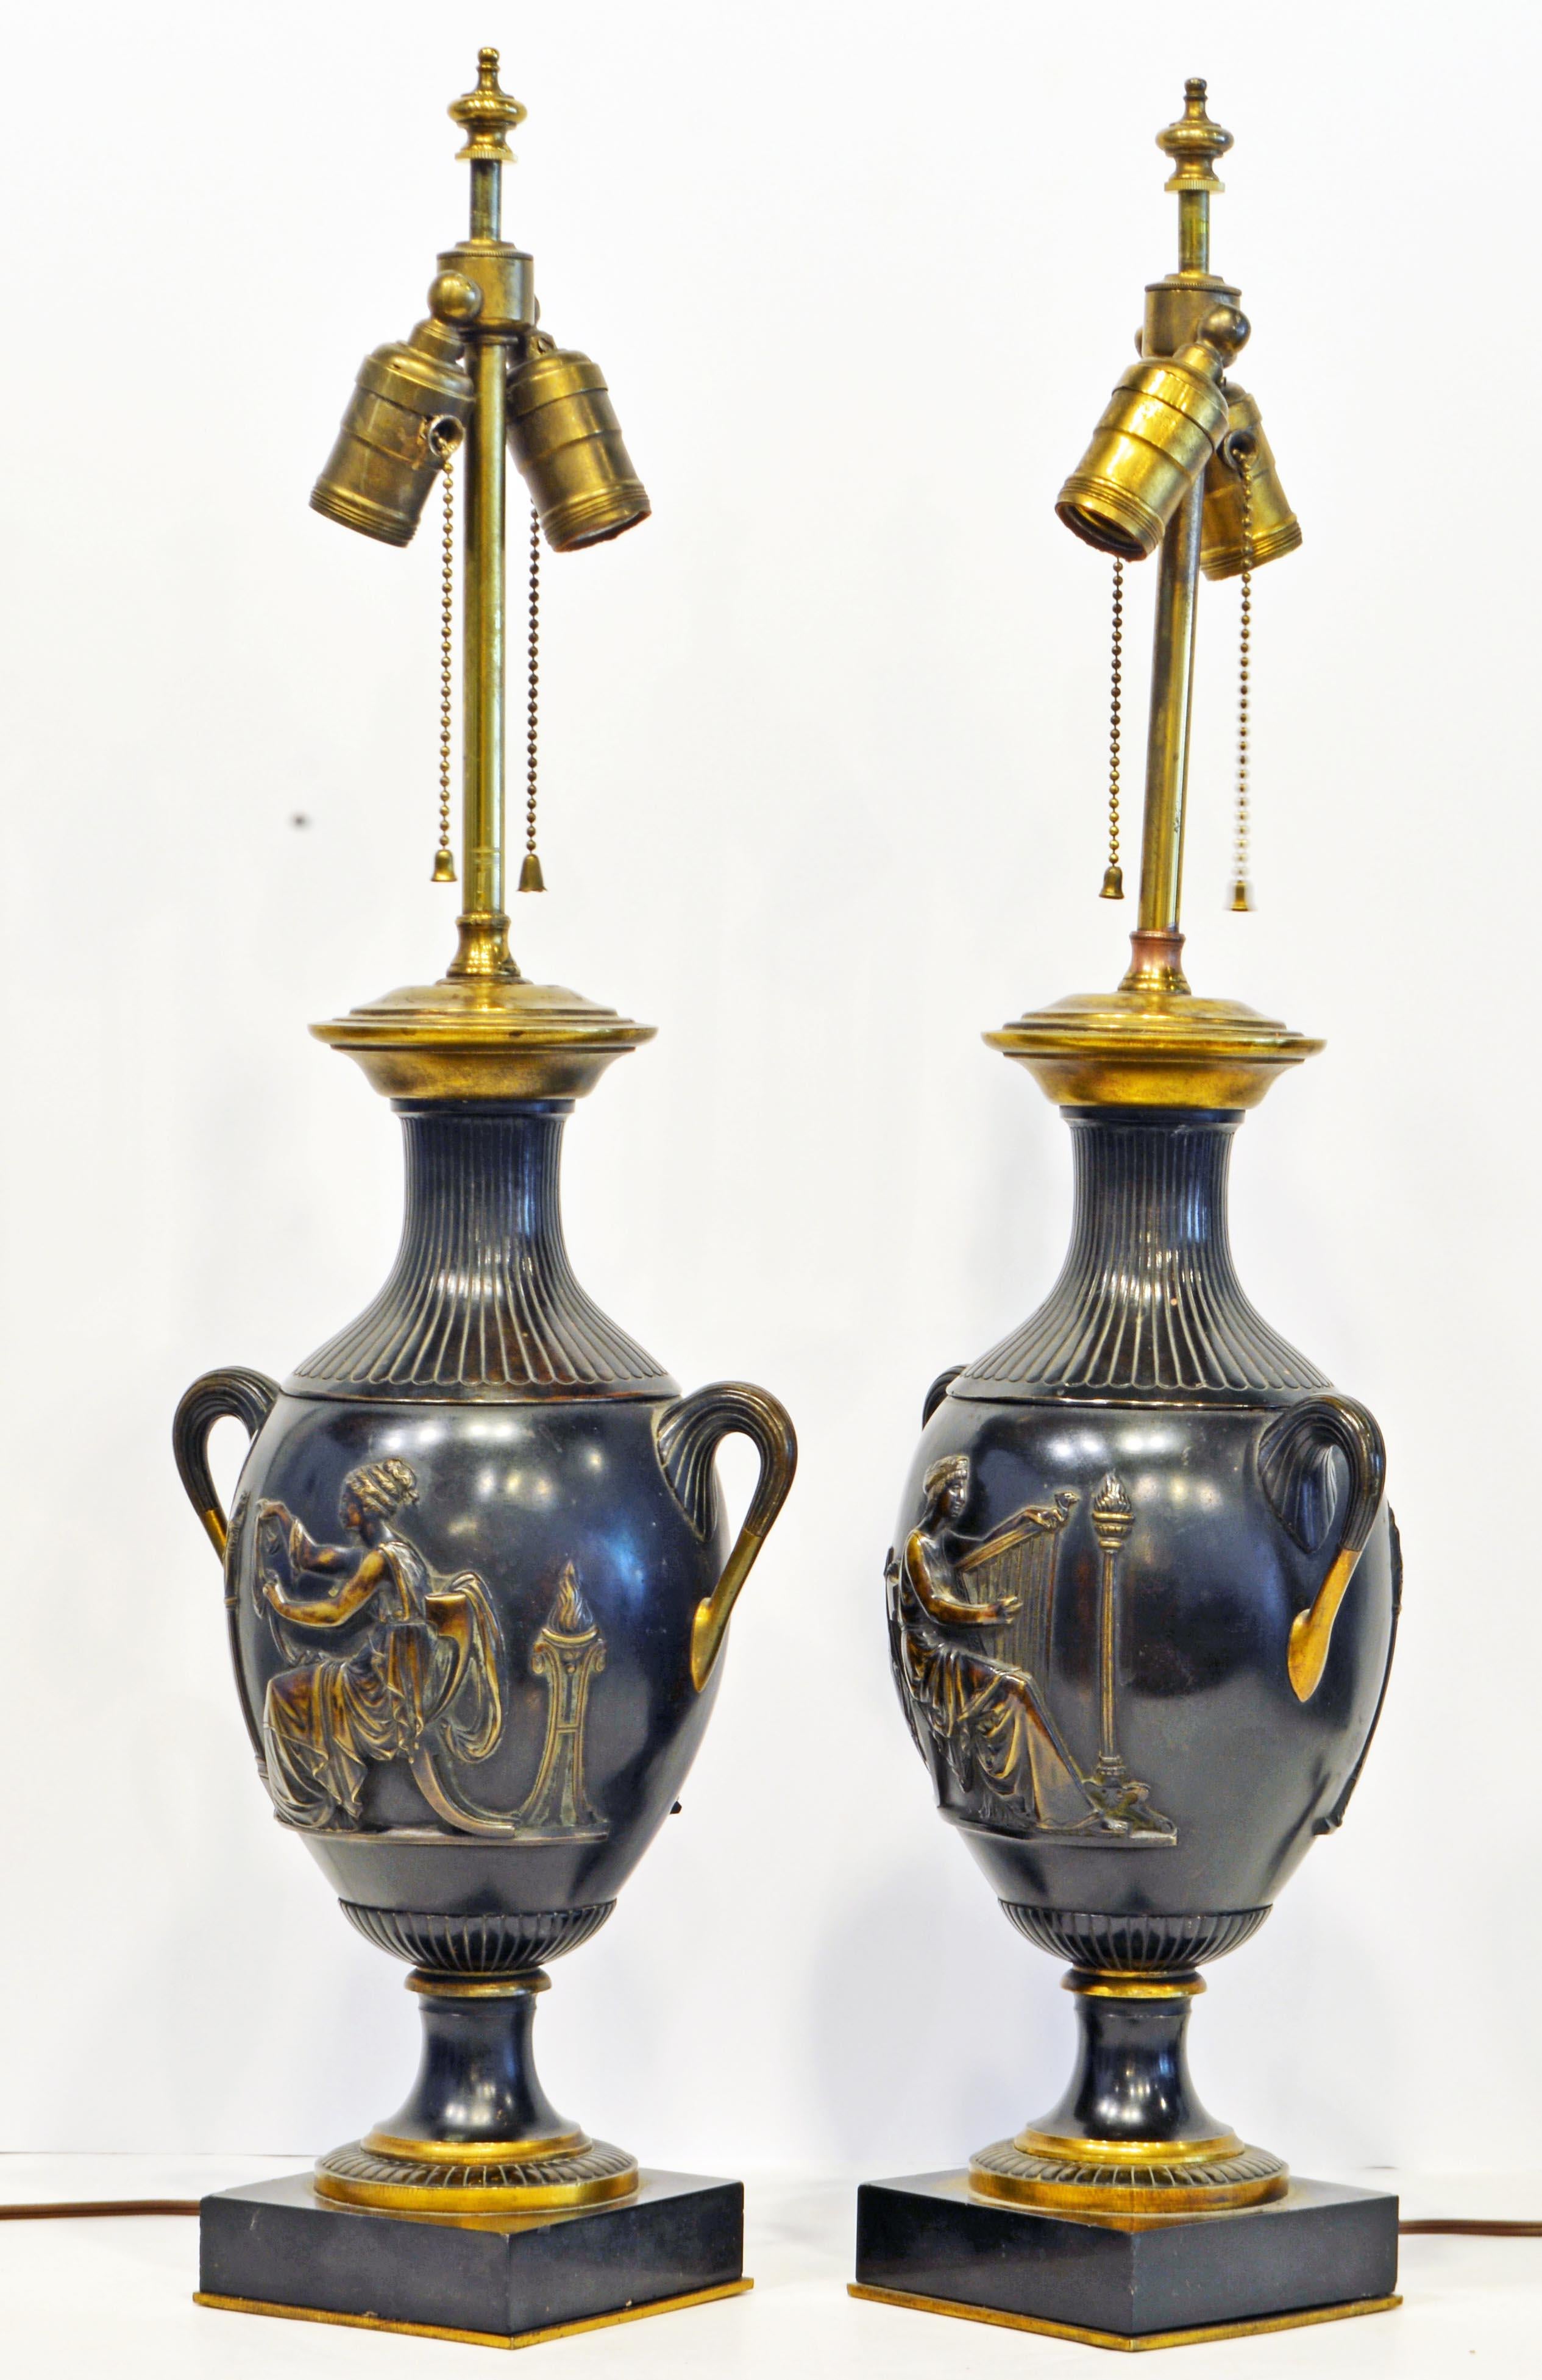 Pair of French Neoclassical Haut-Relief Decorated Patinated Bronze Table Lamps In Good Condition For Sale In Ft. Lauderdale, FL